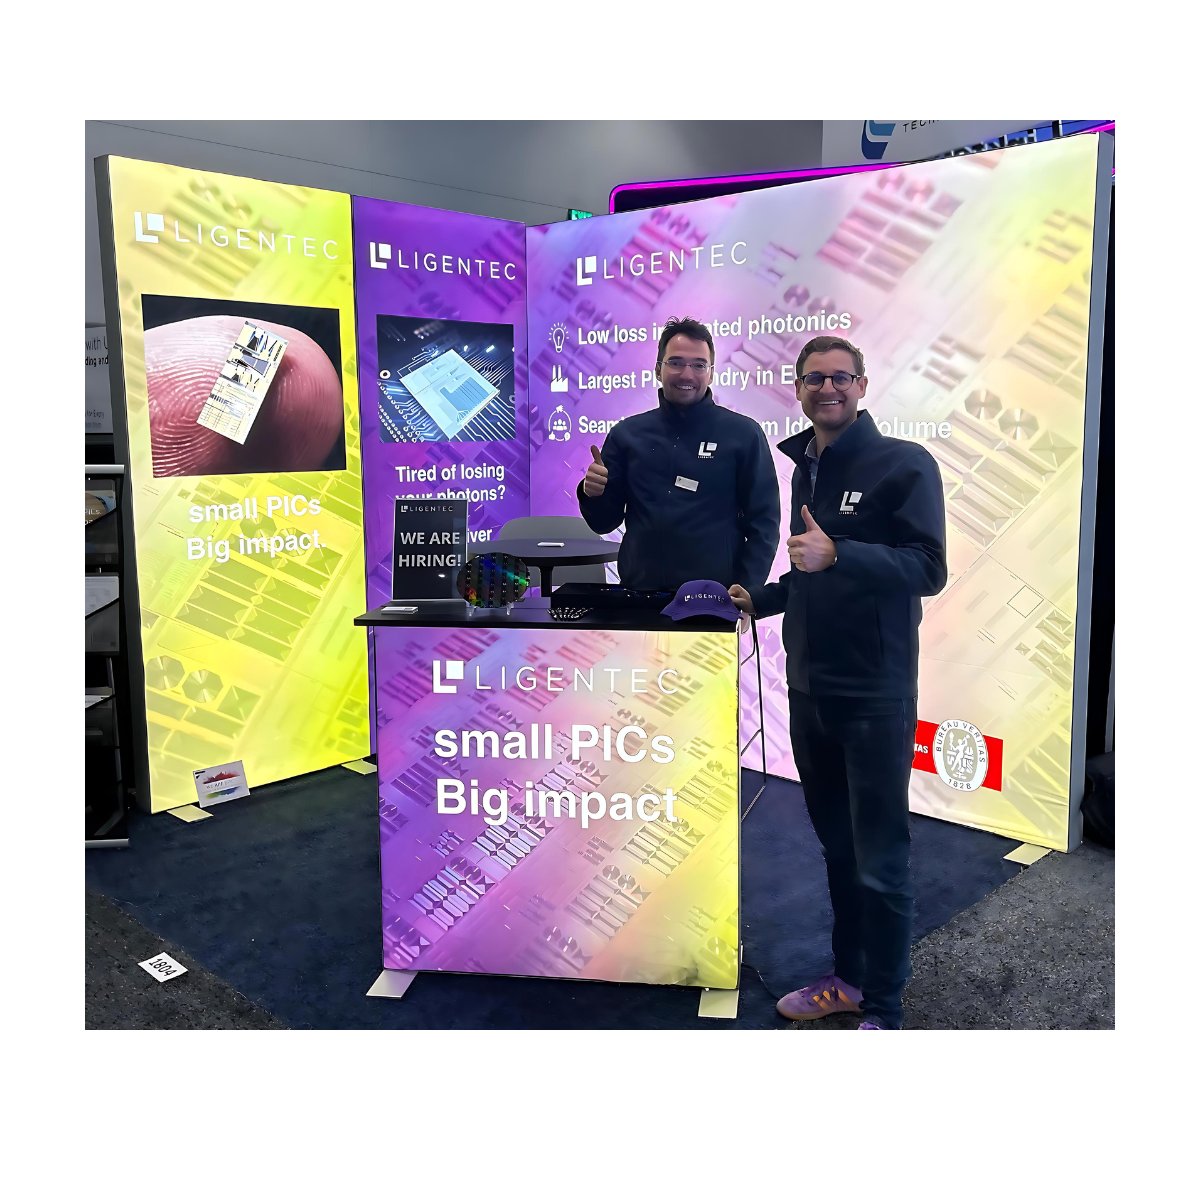 Join us at booth #1804 today at the @ofcconference in San Diego! Let's discuss your PIC needs, partnerships, or just catch up. See you there to advance photonics and nanotechnology! #photonics #OFCconference🌟